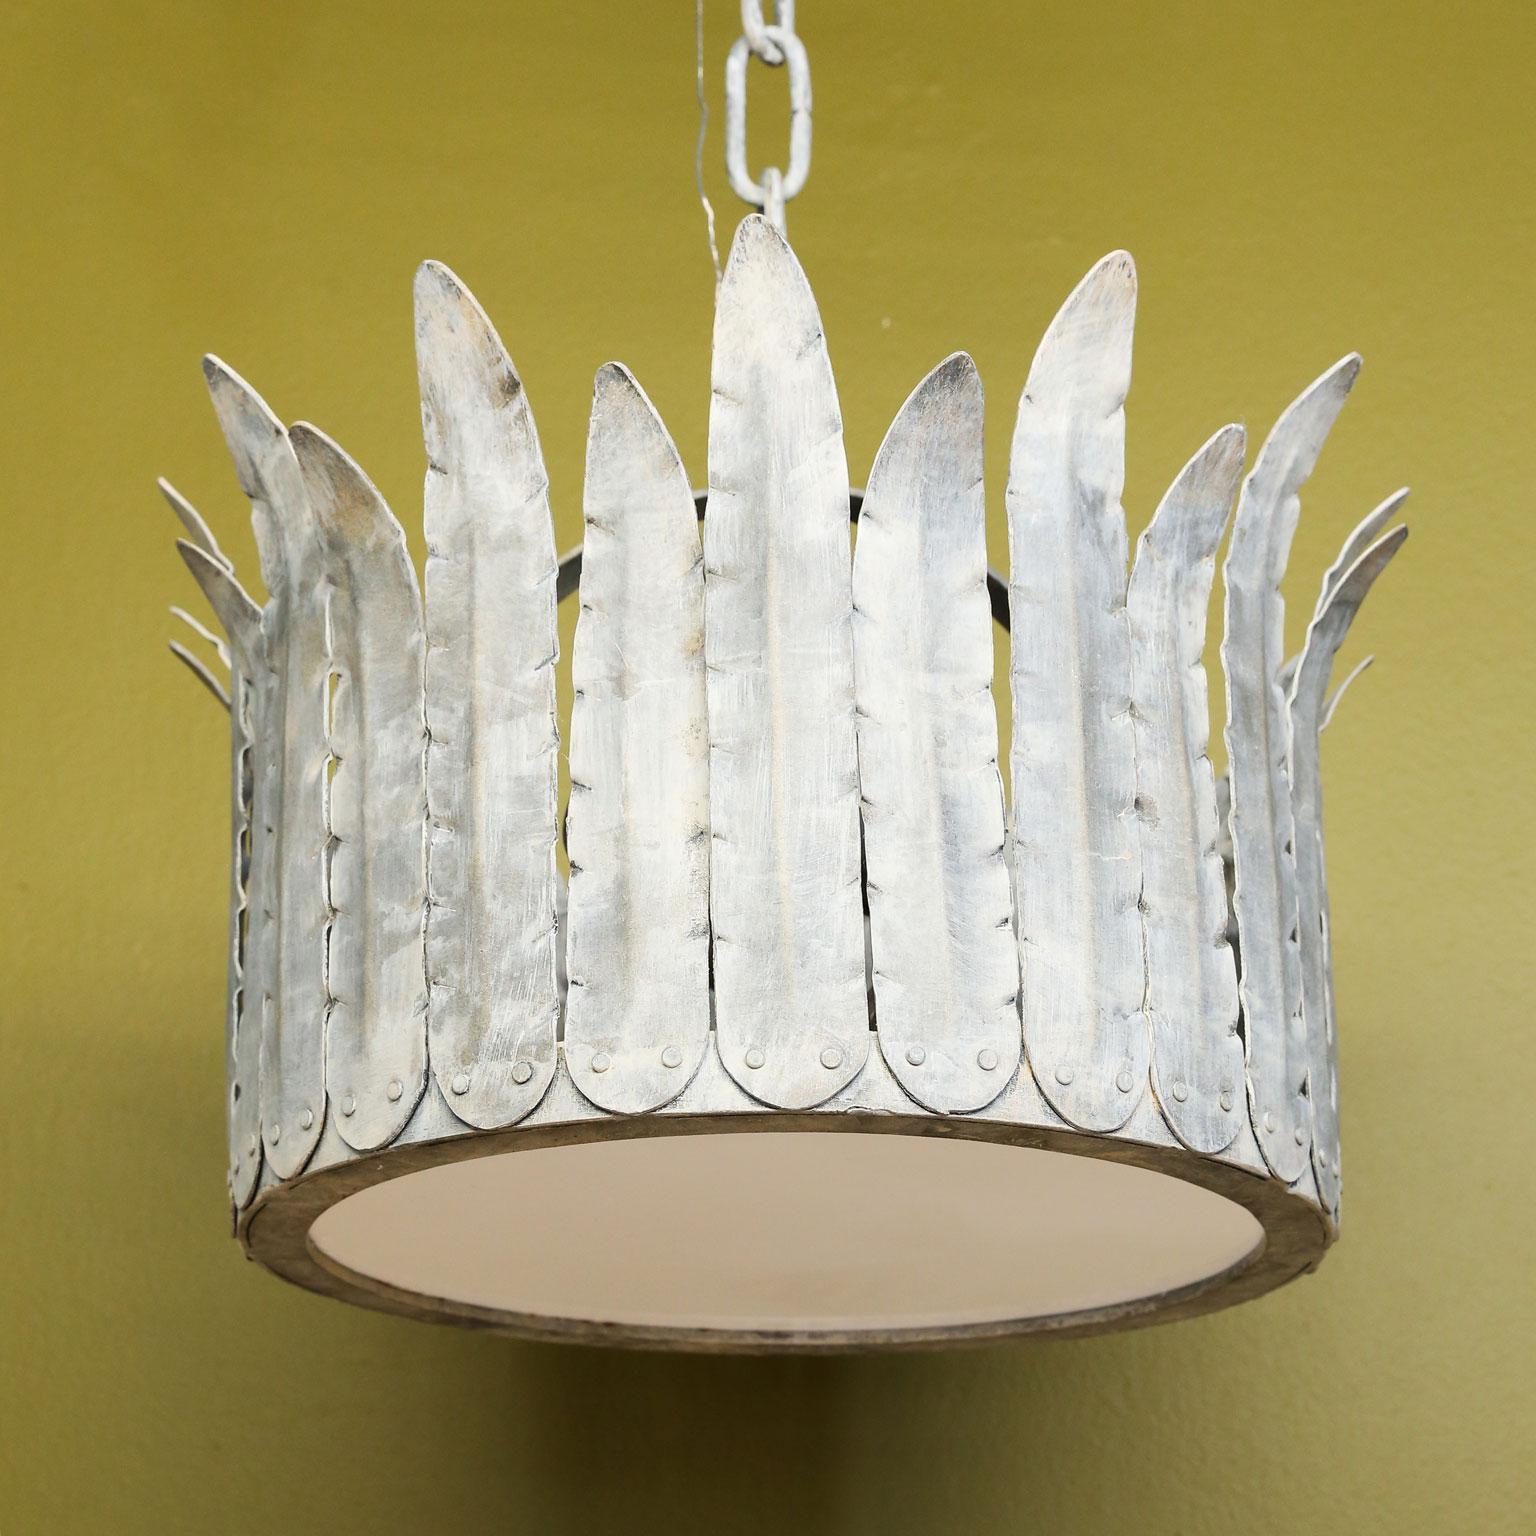 Handcrafted iron “Fairfield” crown light is a metal light fixture with crimped-edged tole feathers in a silver finish. Three porcelain Edison sockets inside with glass bottom. Newly wired for use within the USA using all UL listed parts. Multiples